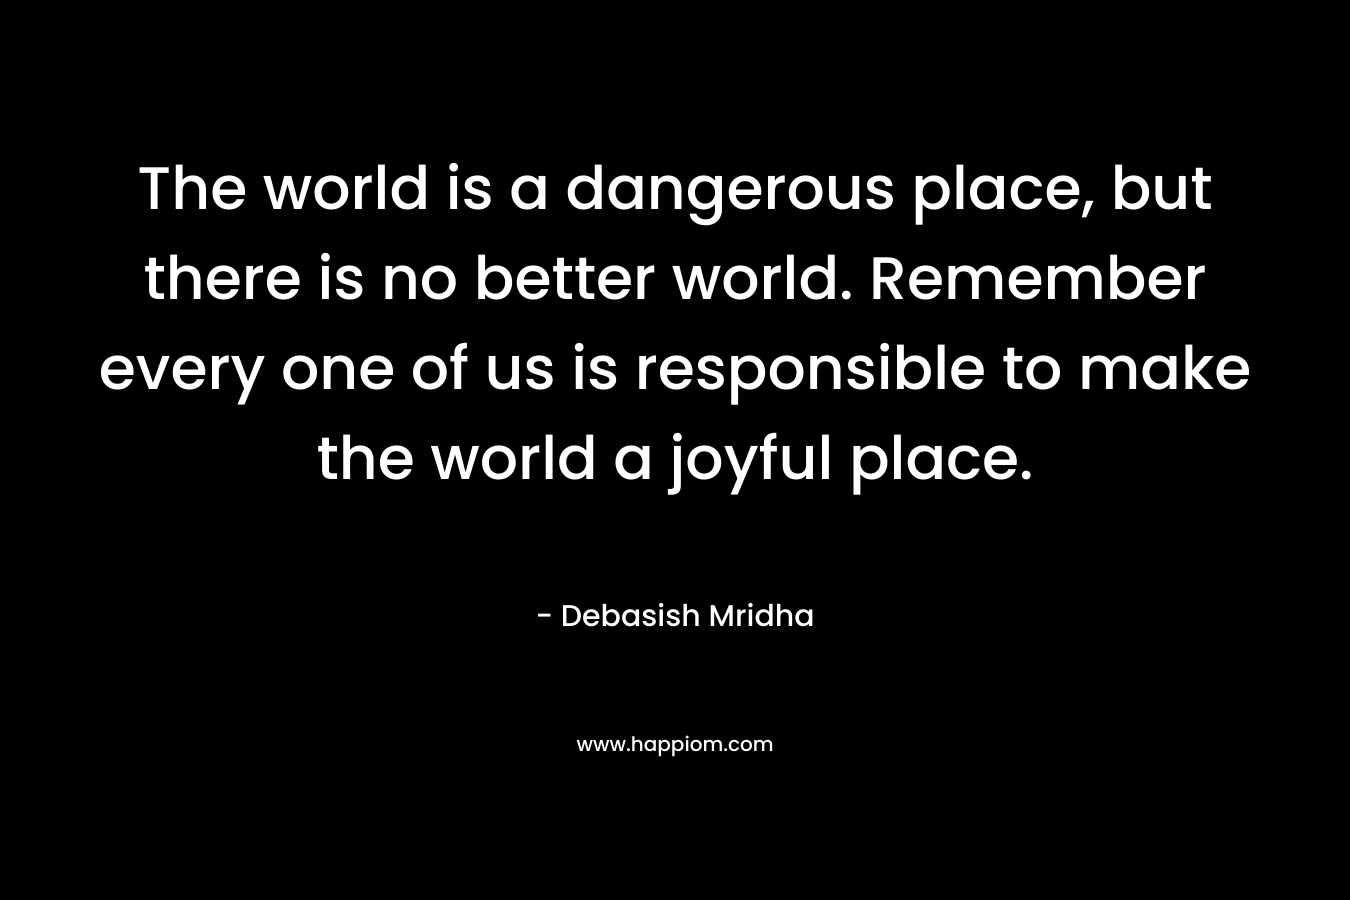 The world is a dangerous place, but there is no better world. Remember every one of us is responsible to make the world a joyful place.